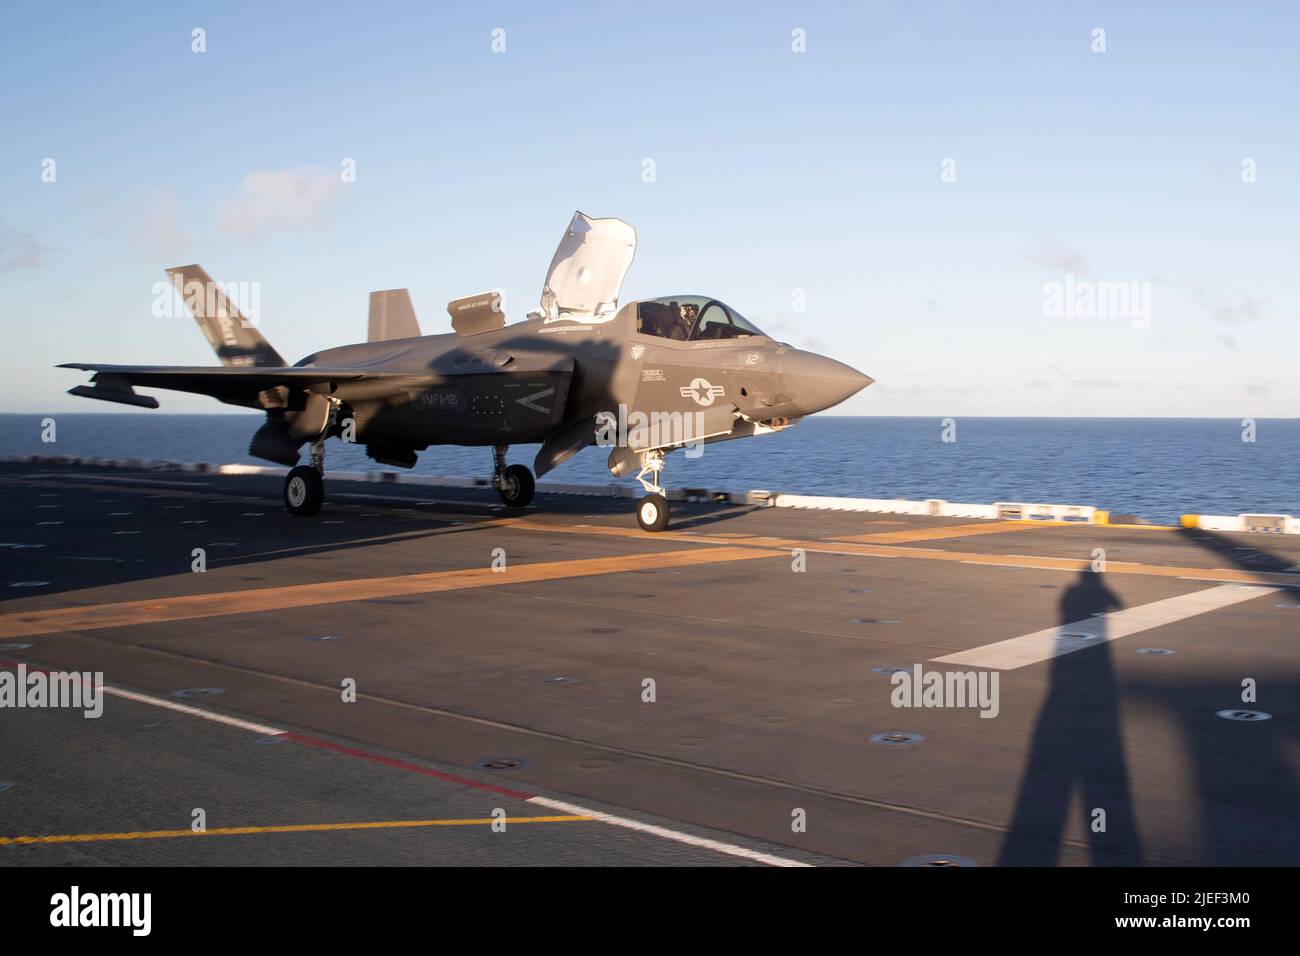 220624-N-XN177-2132 PACIFIC OCEAN (June 24, 2022) – An F-35B Lightning II aircraft assigned to Marine Strike Fighter Squadron (VMFA) 121 launches from the flight deck of amphibious assault carrier USS Tripoli (LHA 7), June 24, 2022. Tripoli is operating in the U.S. 7th Fleet area of operations to enhance interoperability with allies and partners and serve as a ready response force to defend peace and maintain stability in the Indo-Pacific region.  (U.S. Navy photo by Mass Communication Specialist 1st Class Peter Burghart) Stock Photo